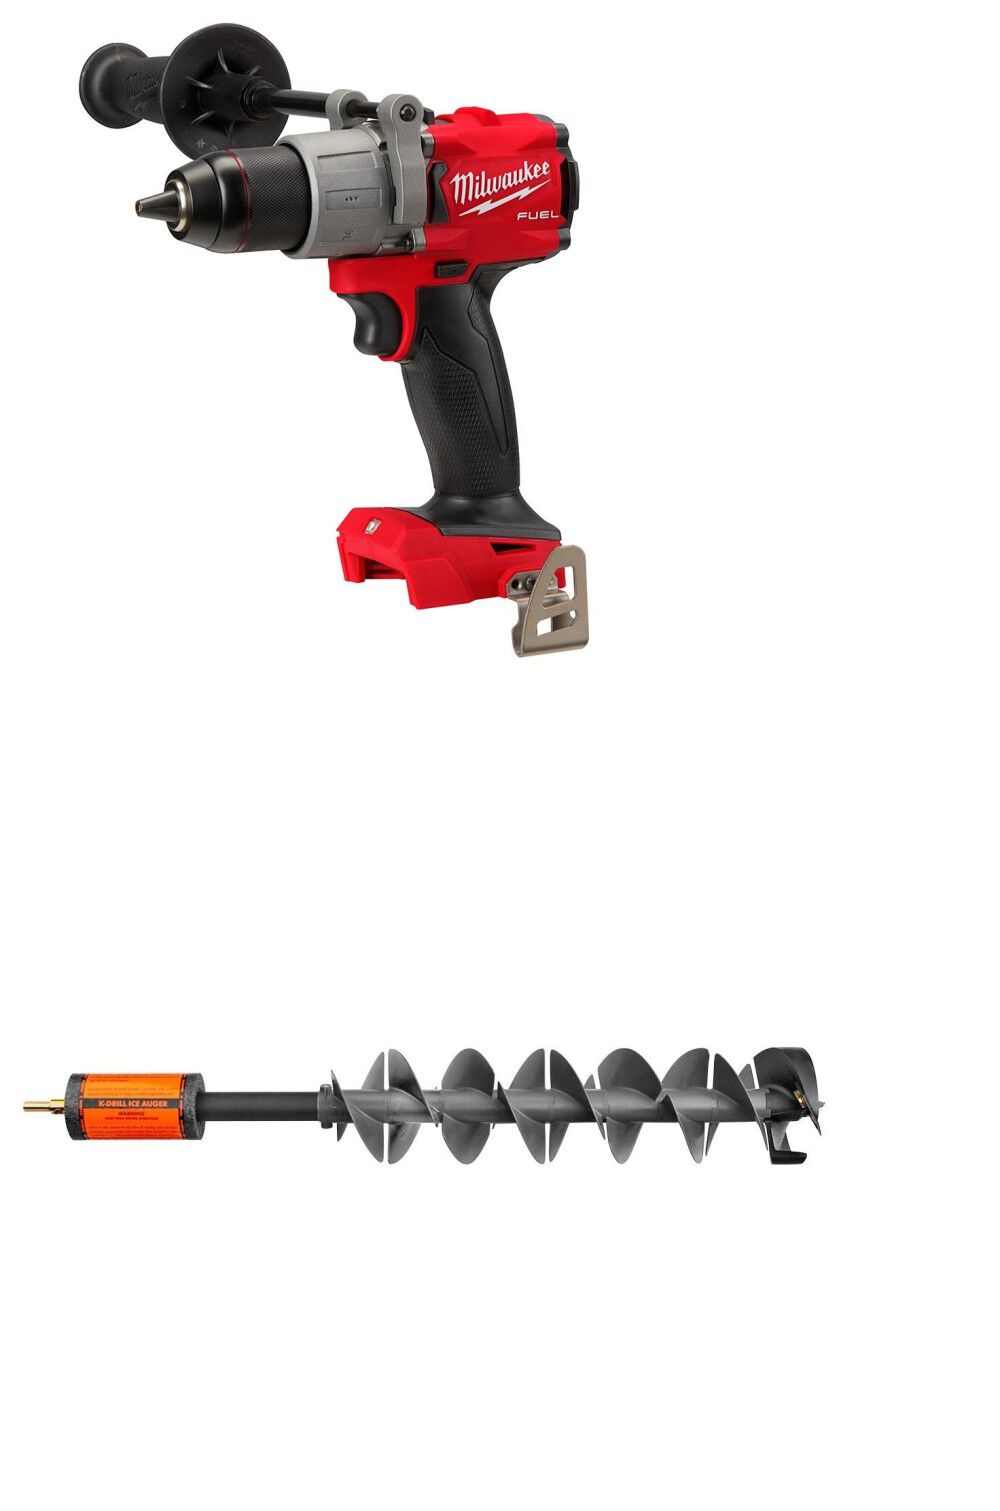 6in Ice Auger with Milwaukee M18 FUEL 1/2in Drill Driver (Bare Tool) Reconditioned IDRL60-2803-80